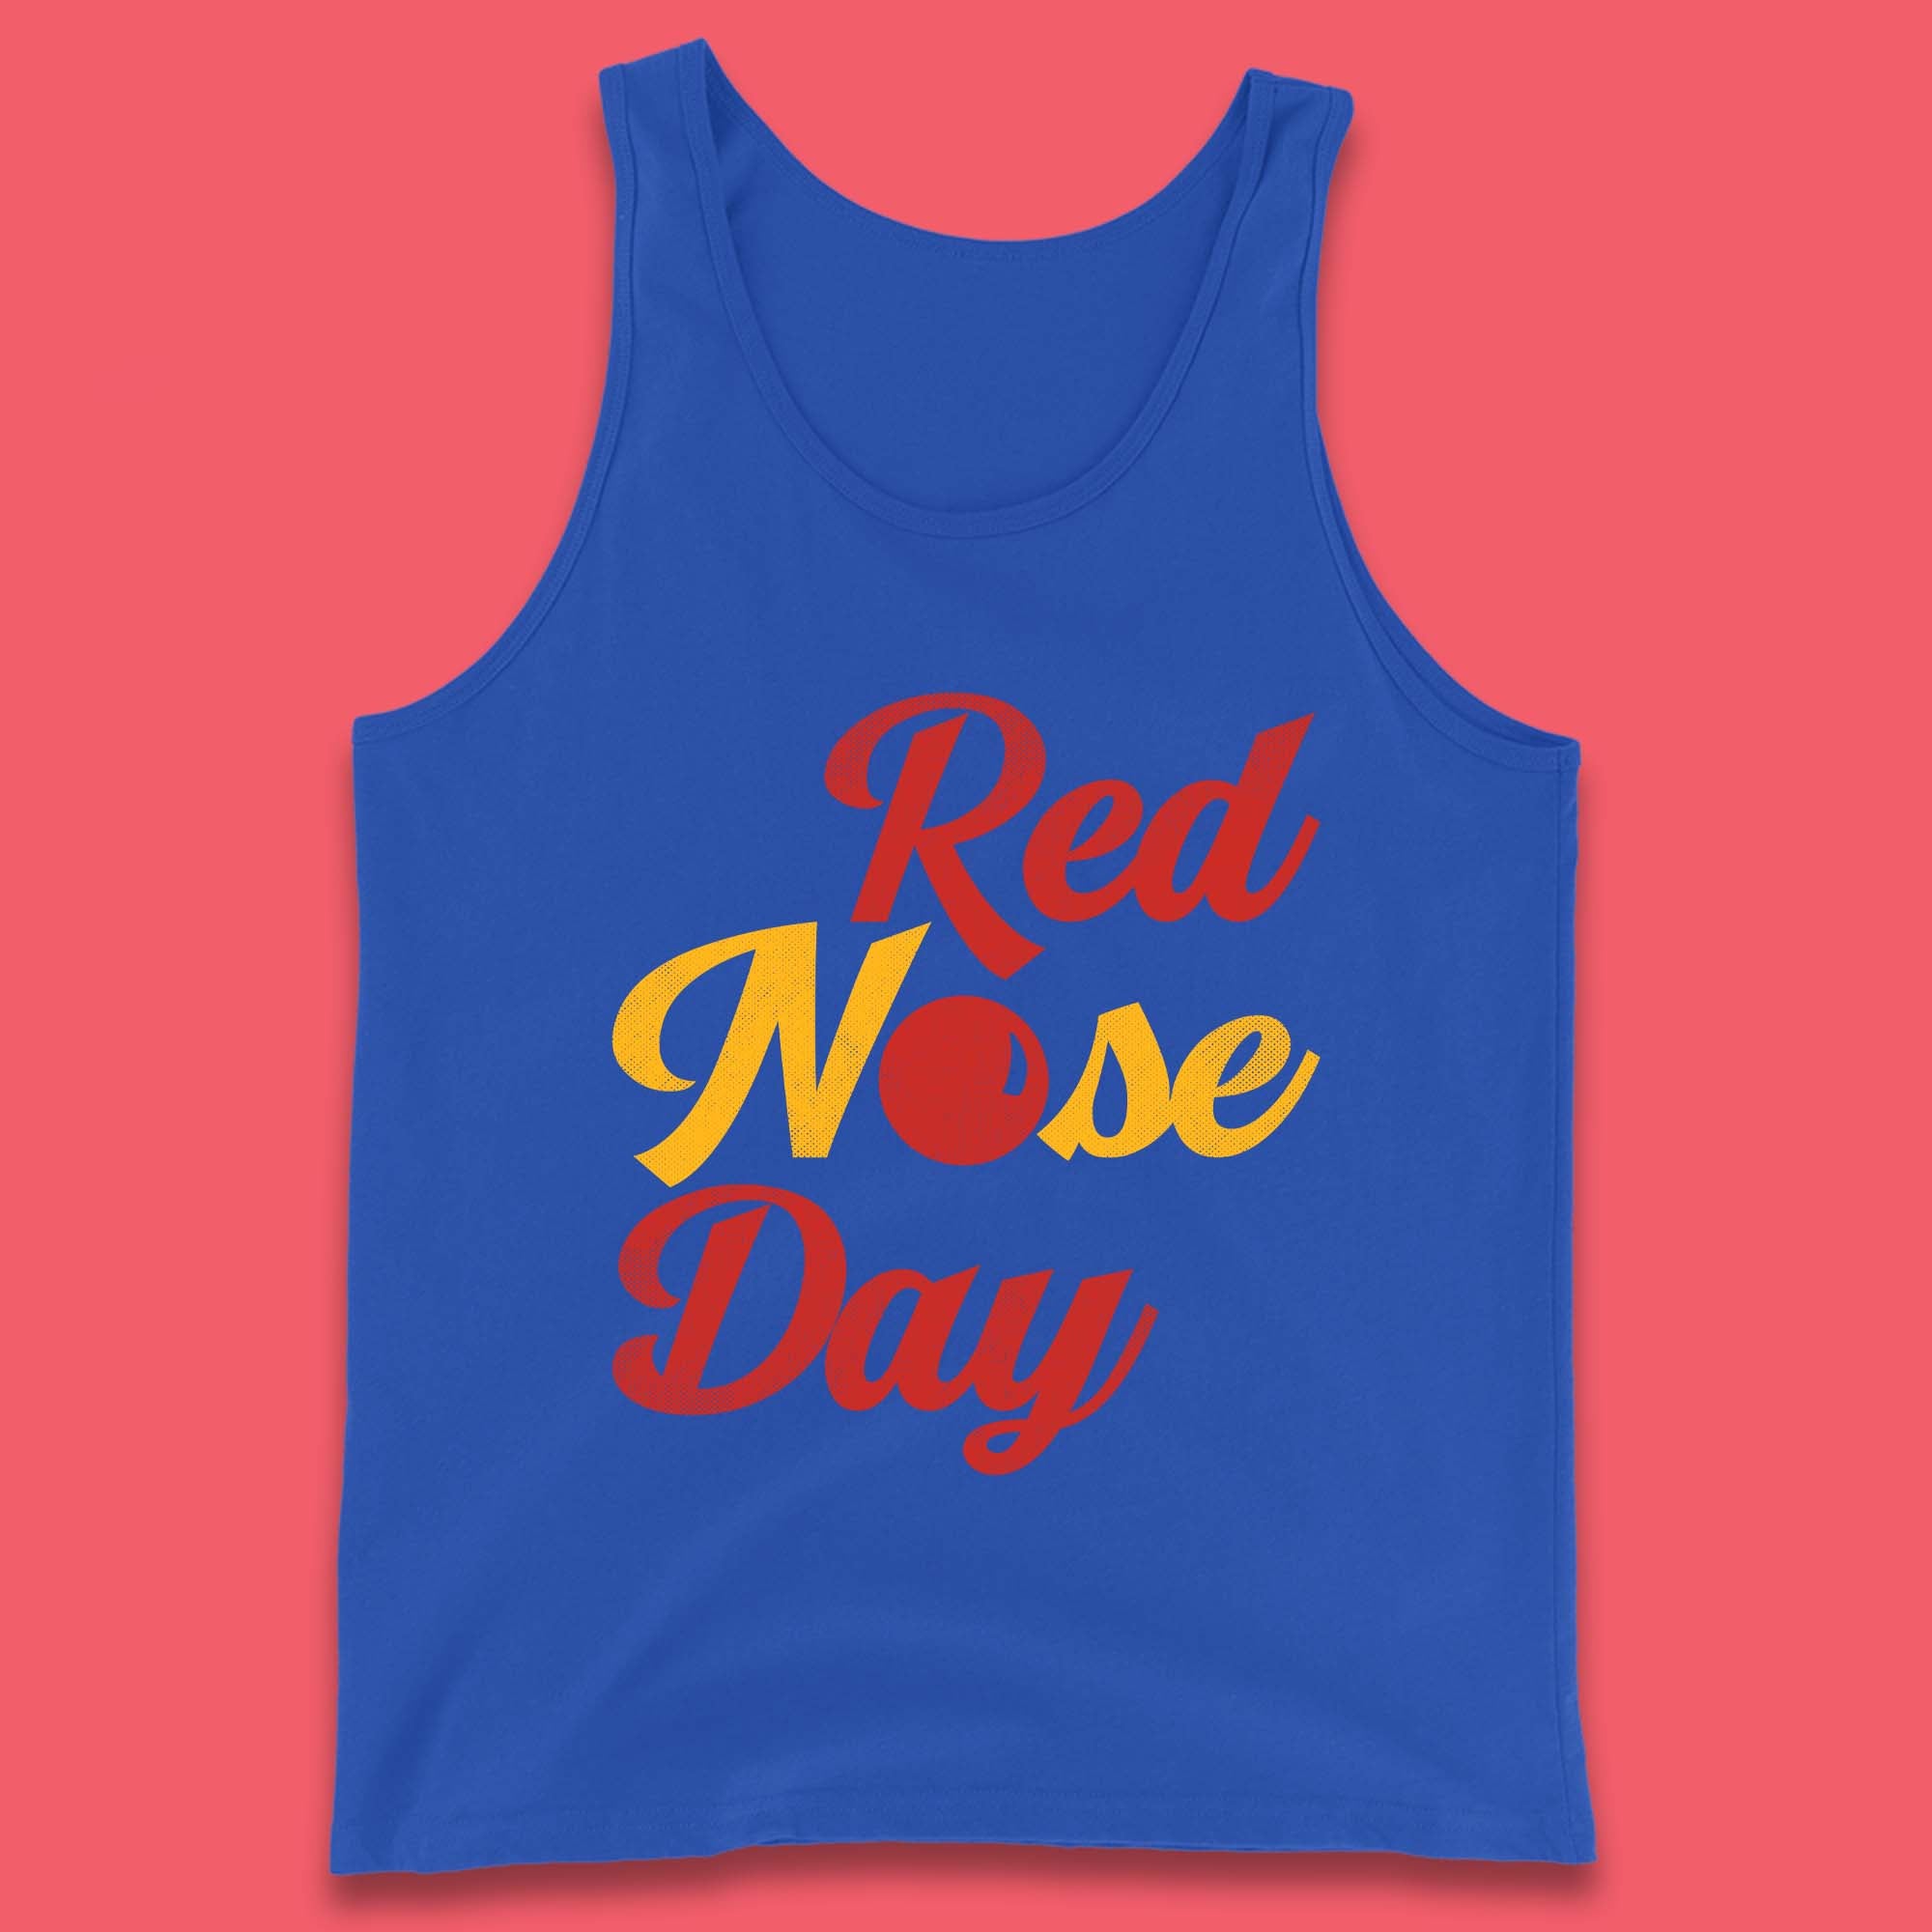 Red Nose Day Tank Top